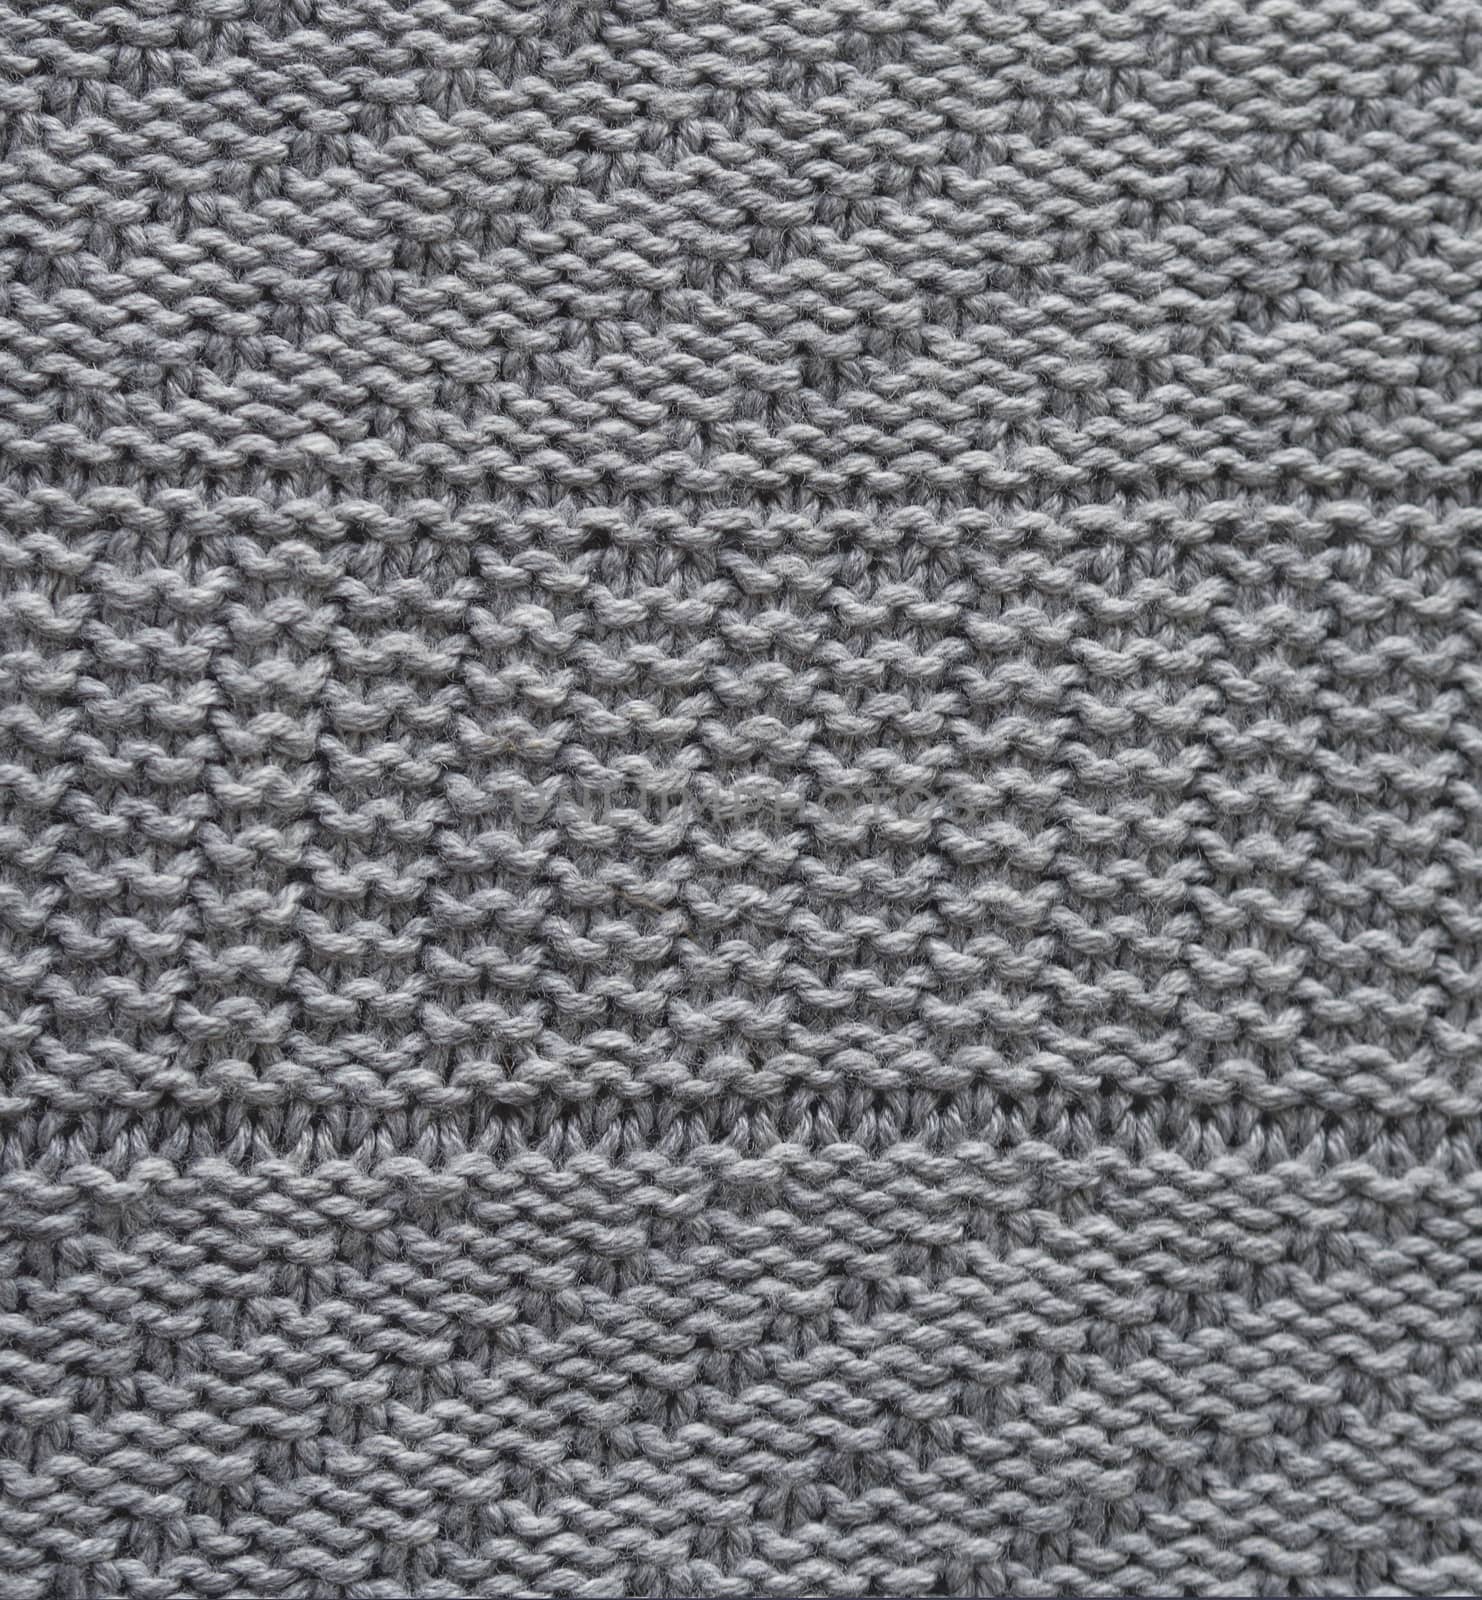 grey wool hand knitted texture abstract background by Henkeova